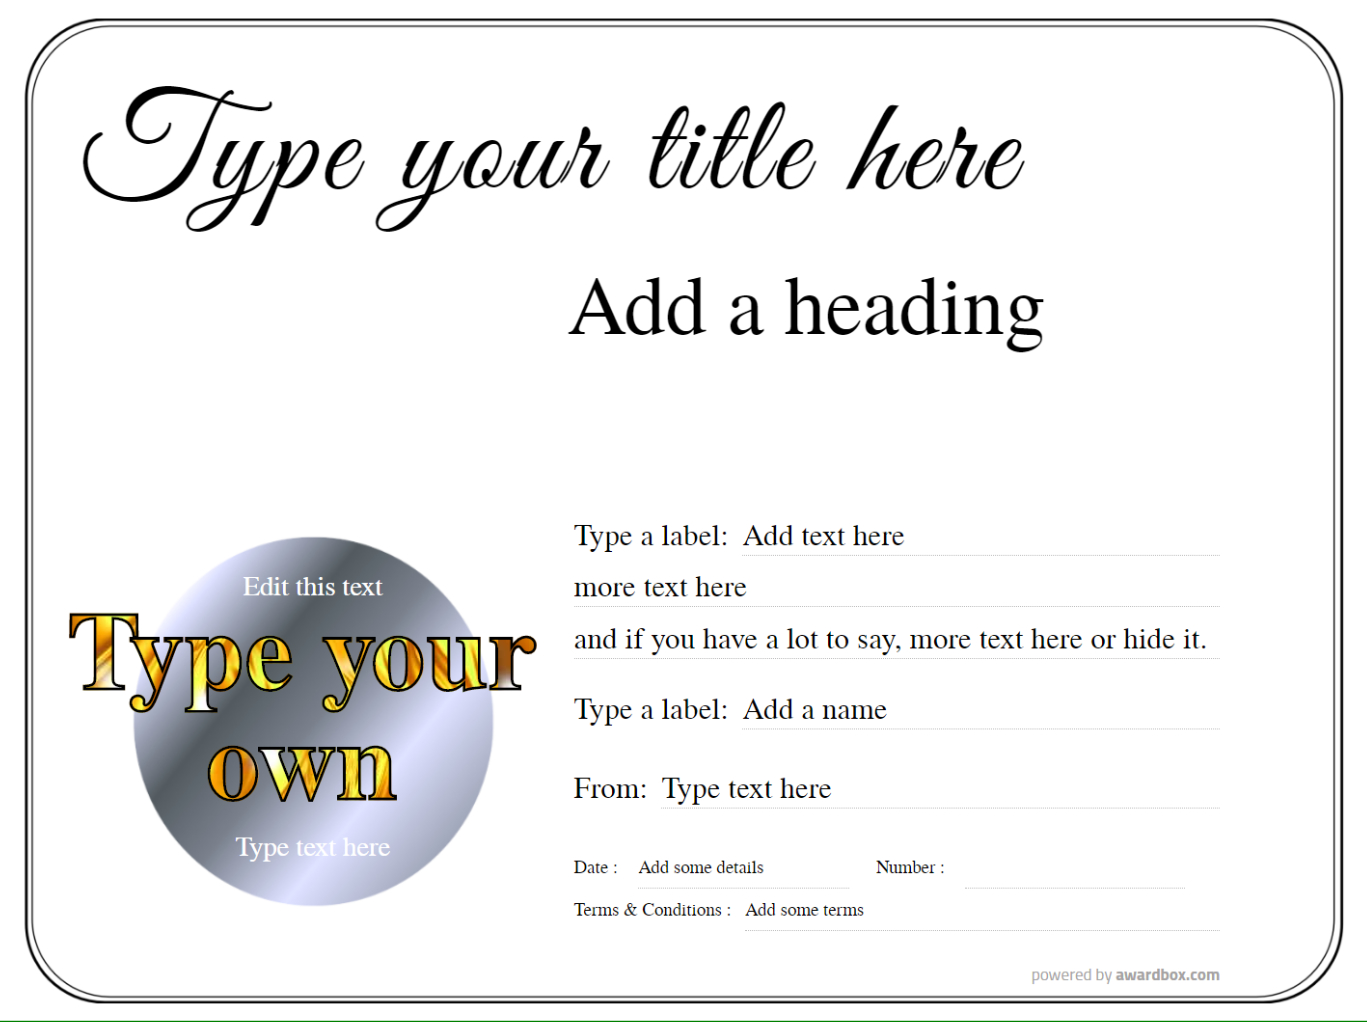 Free Gift Certificate templates and ideas - fully editable With Free Funny Certificate Templates For Word